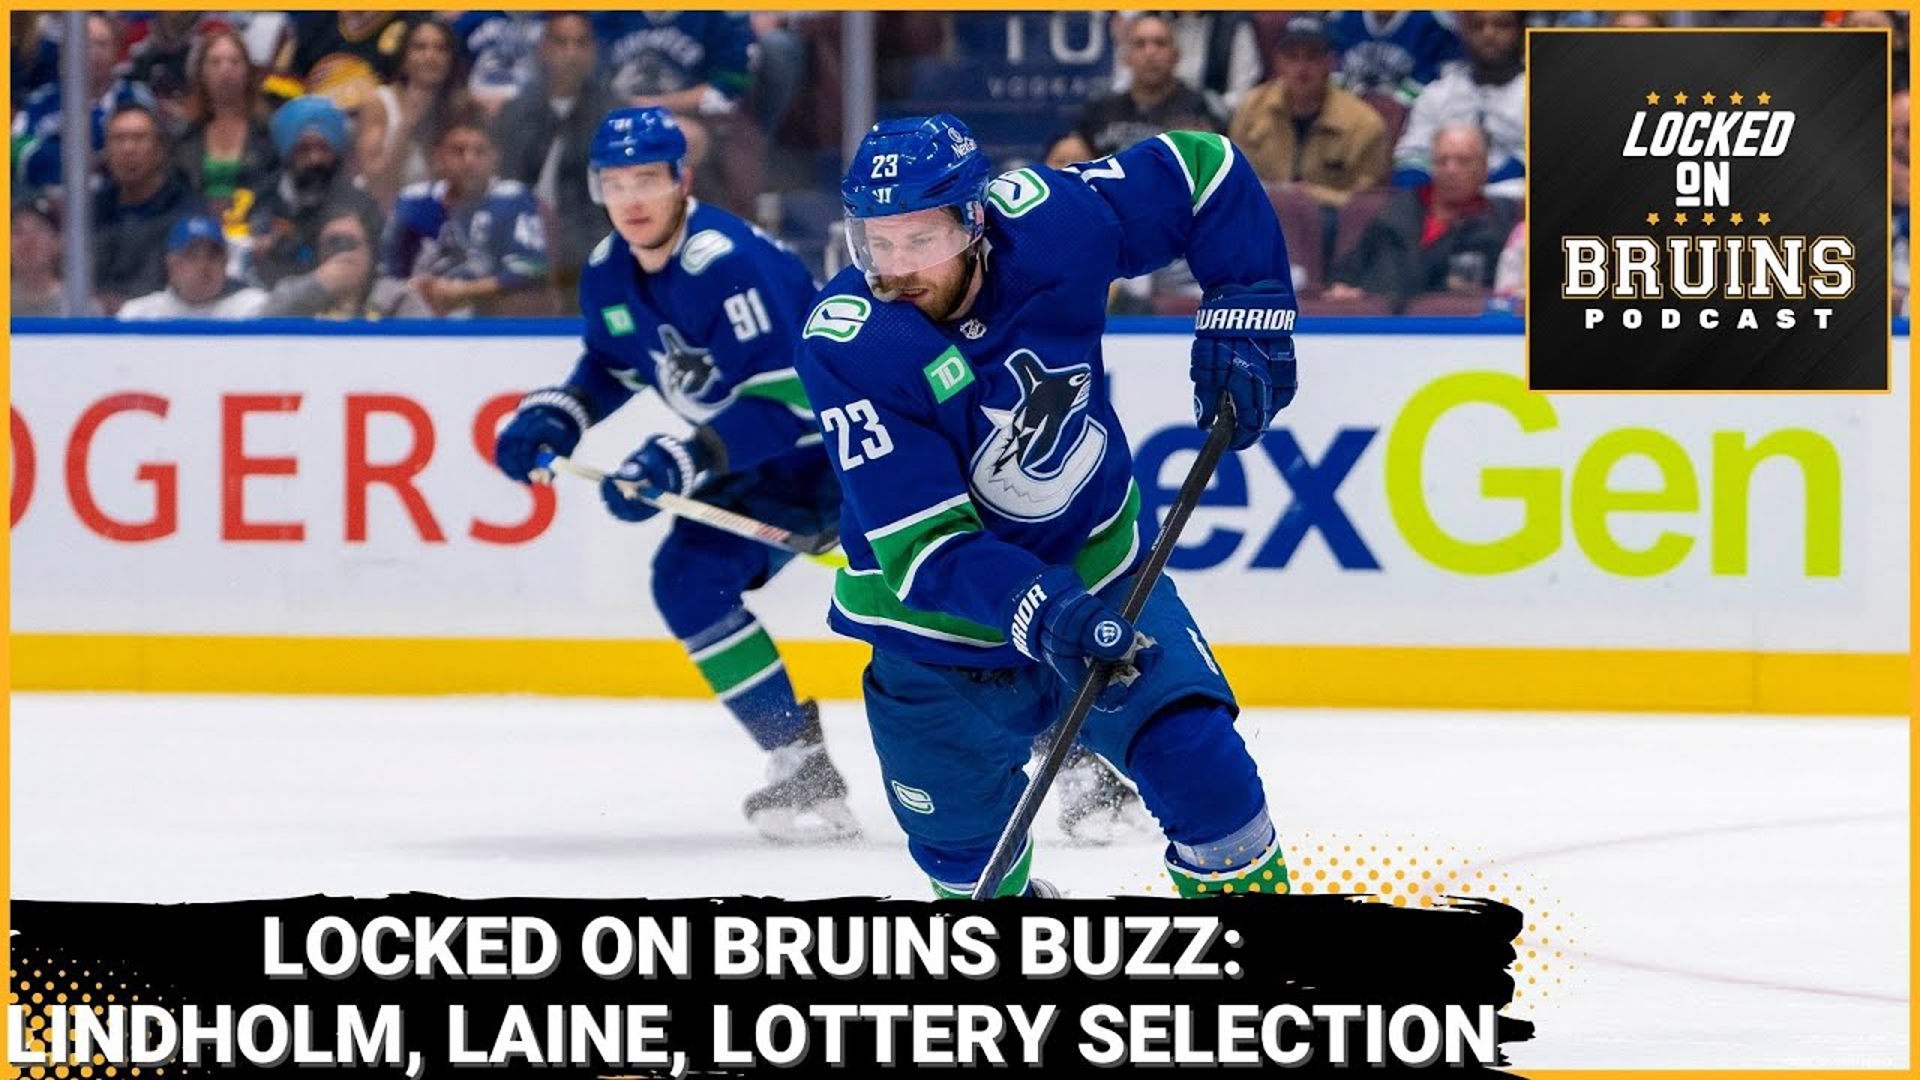 Lindholm, Laine, Lottery Selections. Should the Bruins Take the L?